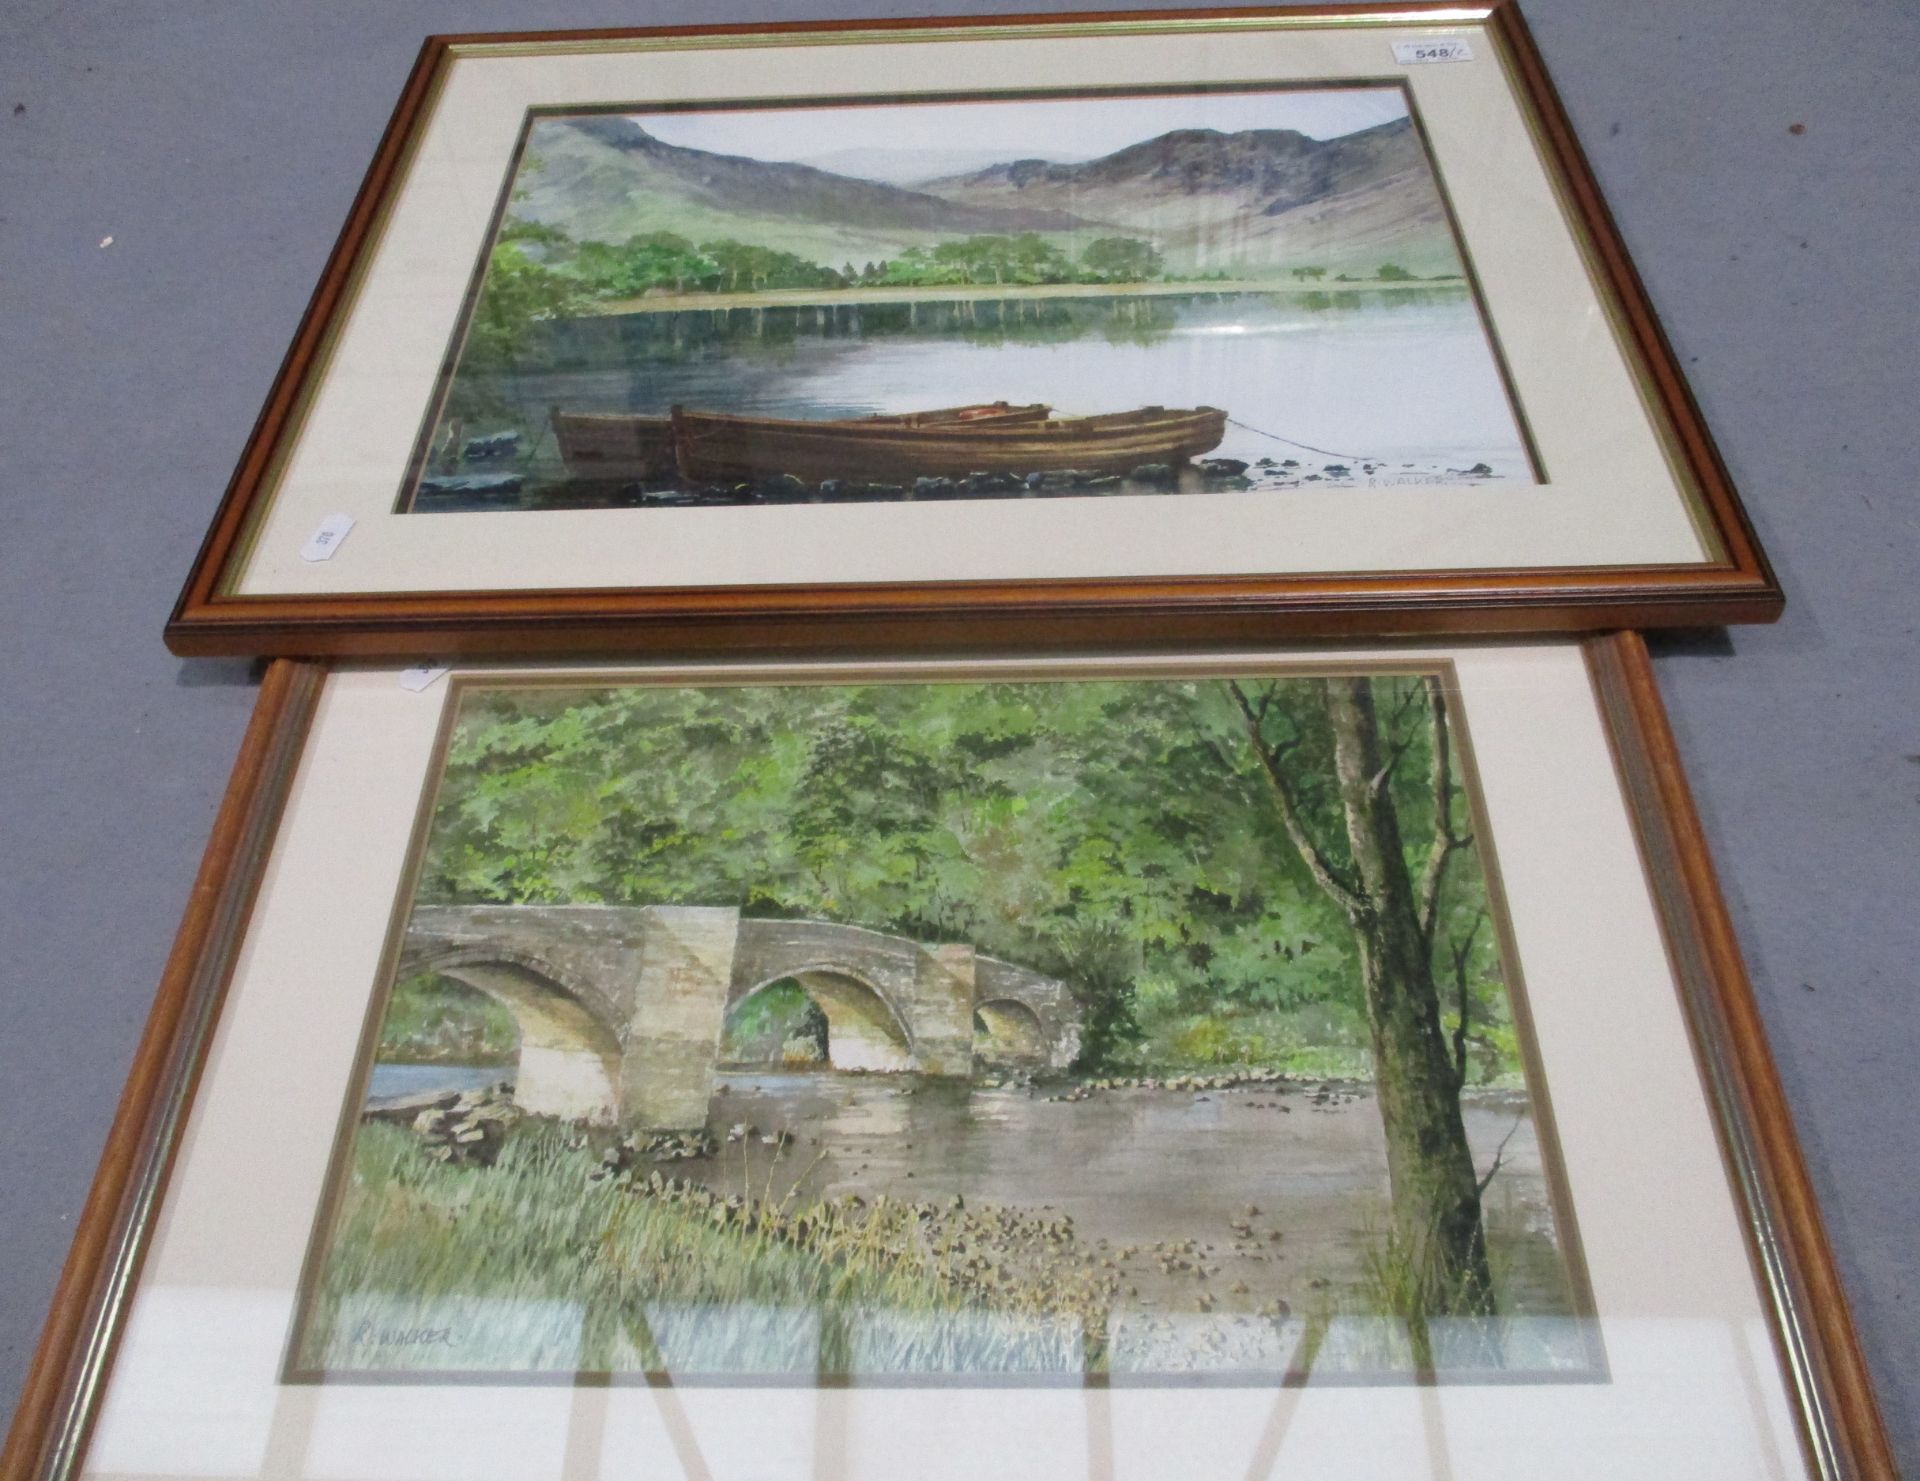 R Walker framed watercolour 'Boats on Buttermere' 30 x 42cm signed and another 'Barden Bridge' 26 x - Image 2 of 2